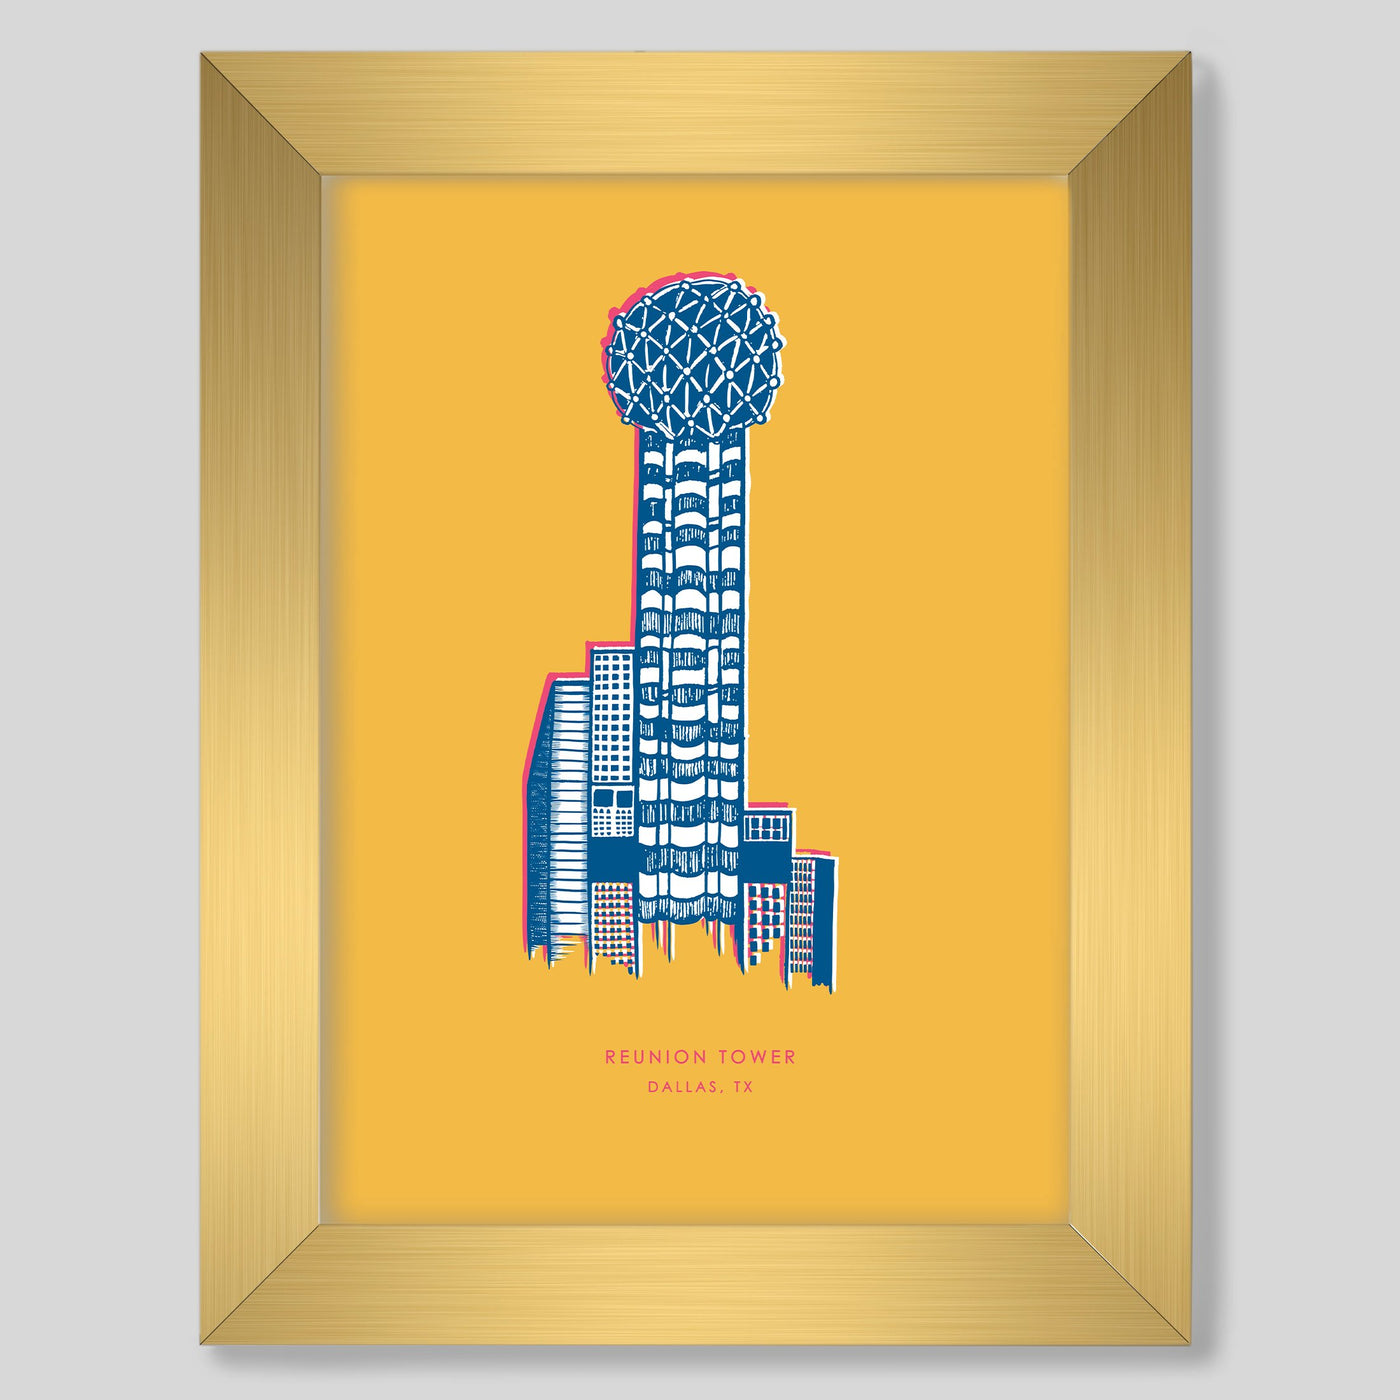 Gallery Prints Yellow / 8x10 / Gold Frame Reunion Tower Gallery Print Katie Kime